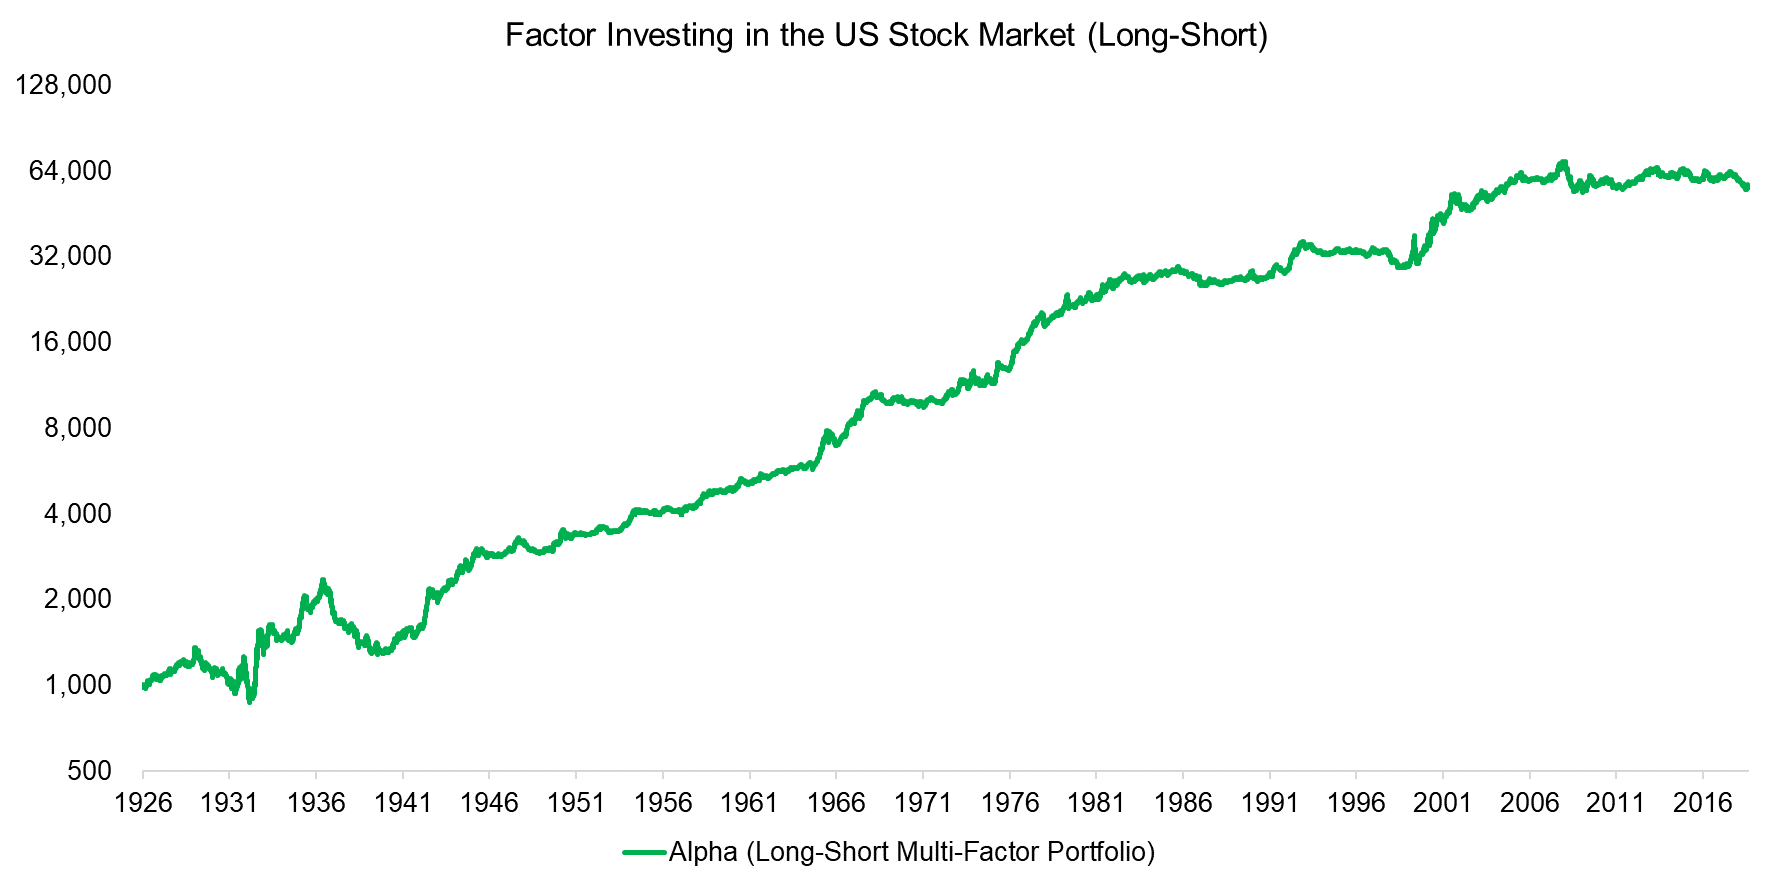 Factor Investing in the US Stock Market (Long-Short)